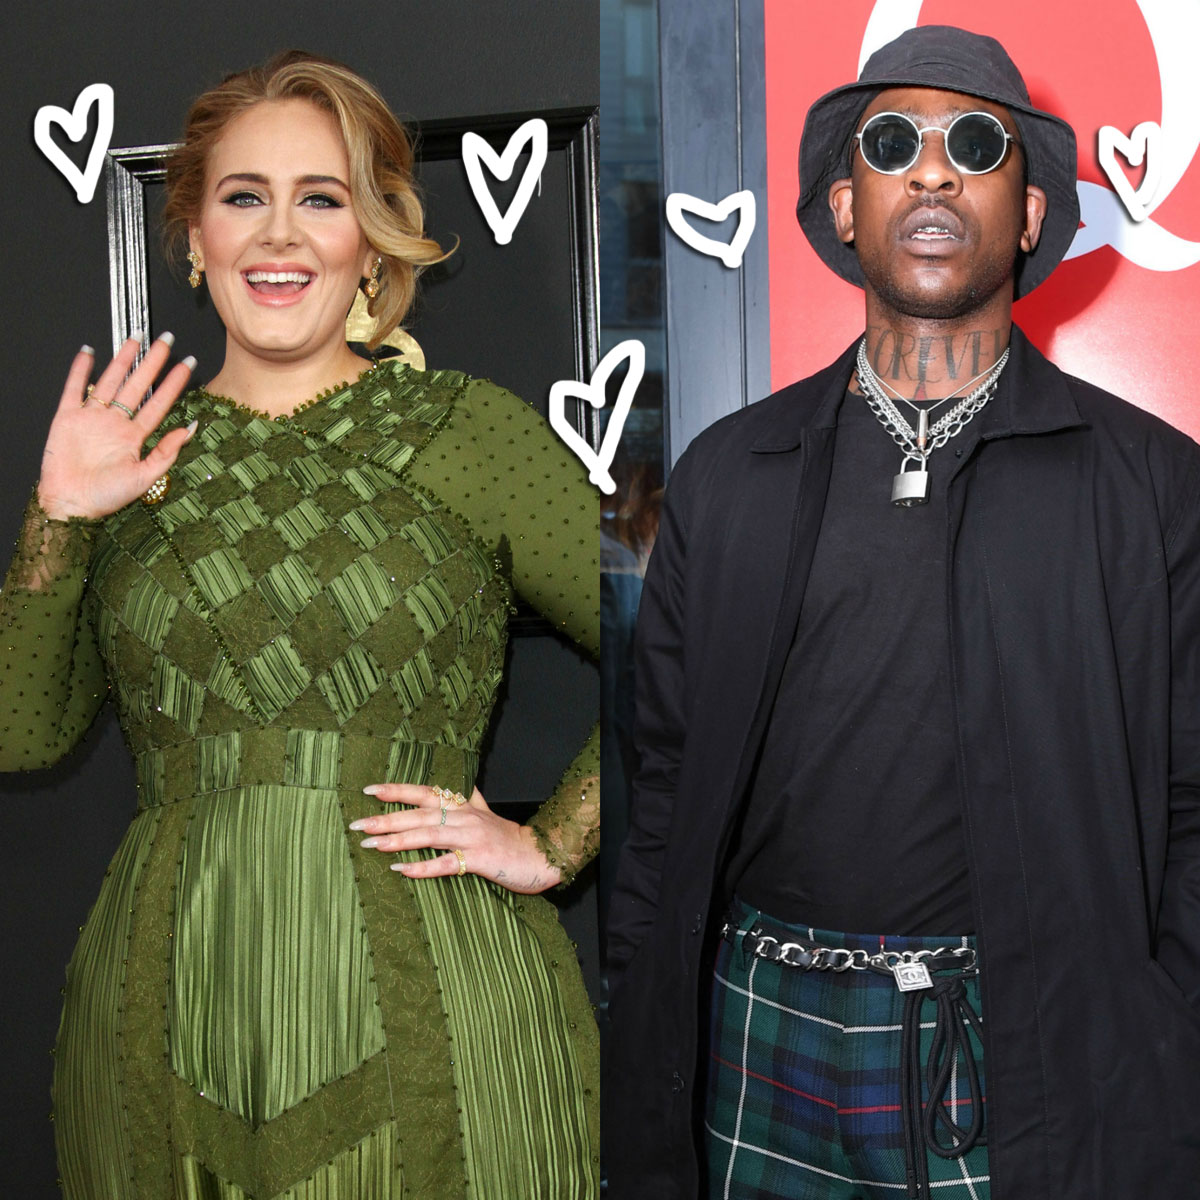 Adele and Skepta are dating according to reports